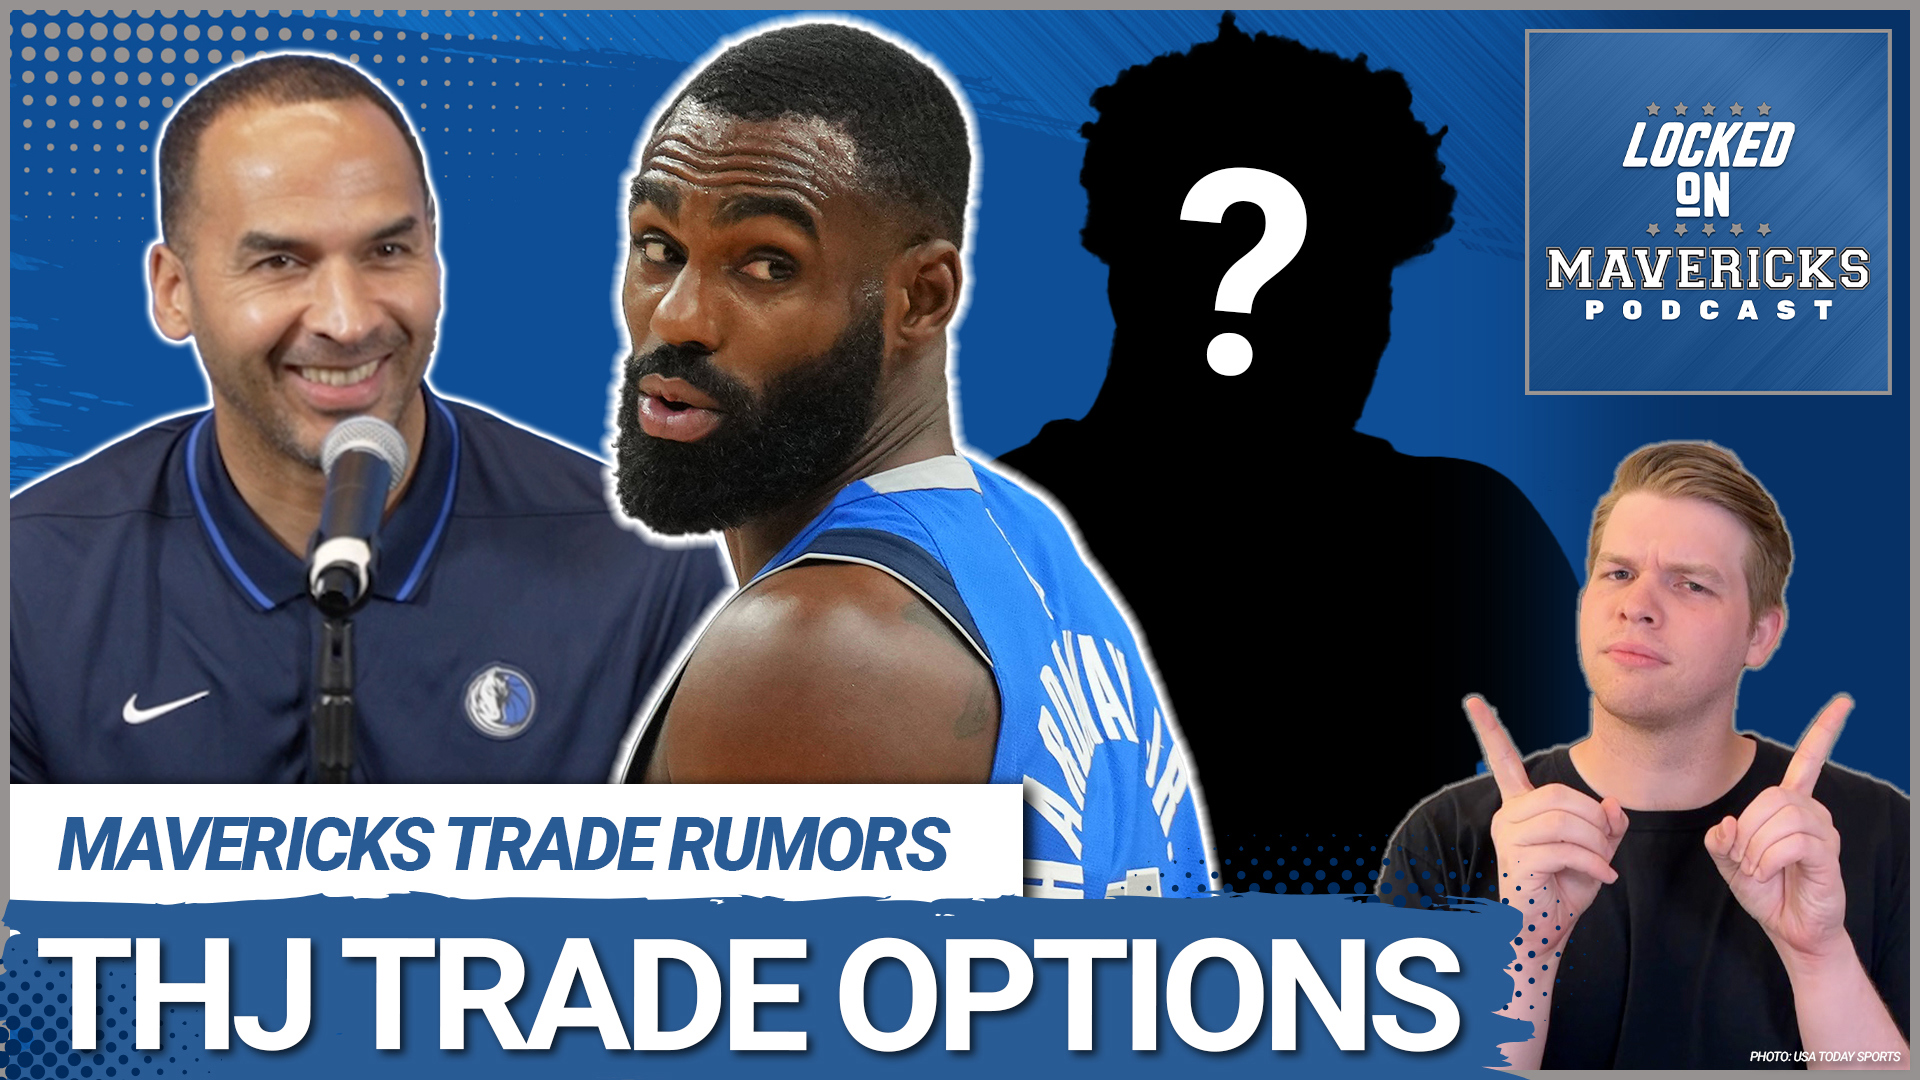 Nick Angstadt dives into the latest trade rumors surrounding the Dallas Mavericks, focusing on the potential trade of Tim Hardaway Jr.